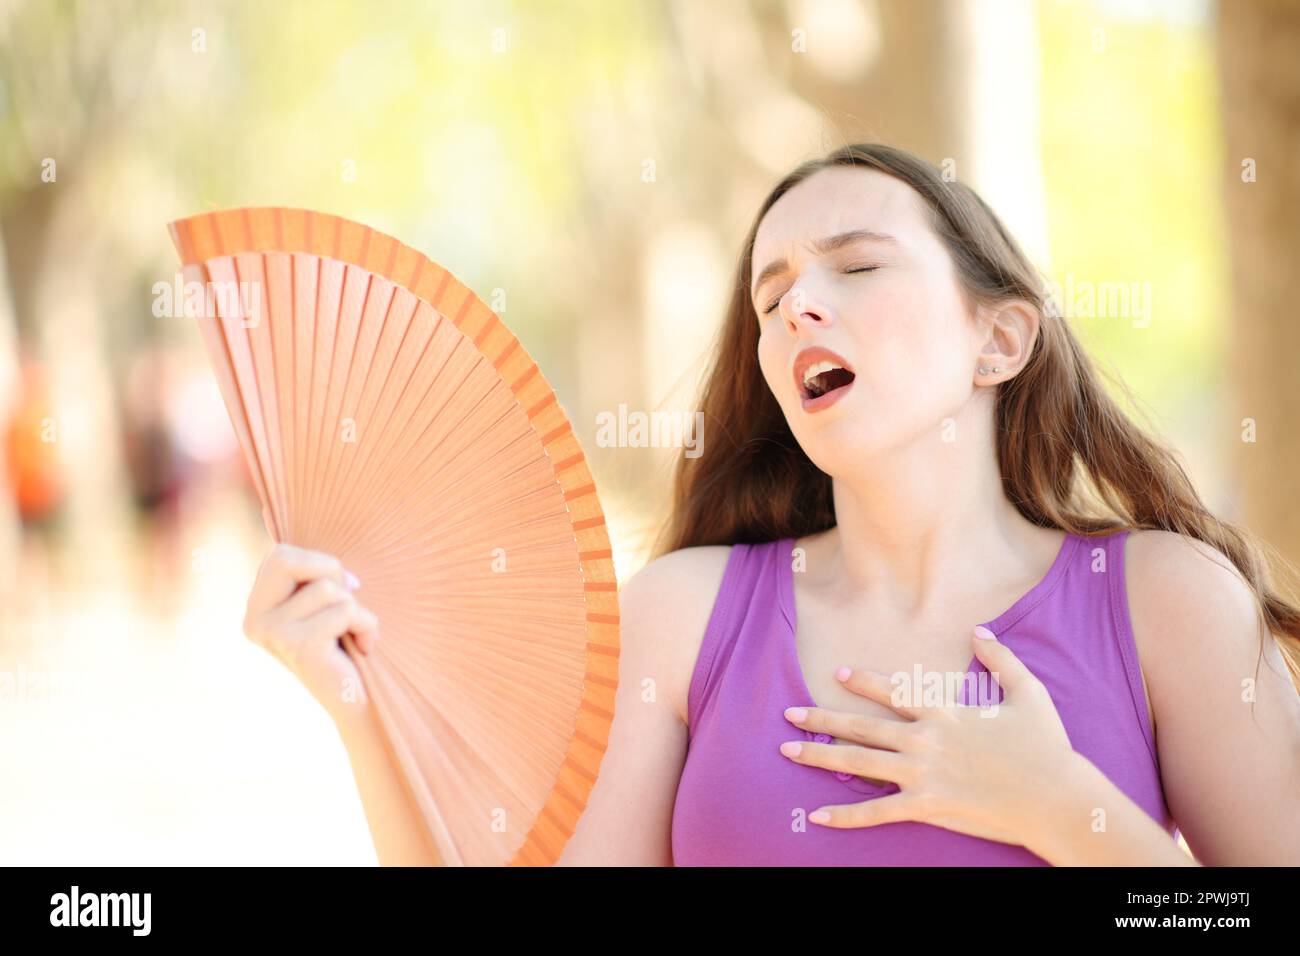 Woman stressing fanning on summer hot day in a park Stock Photo